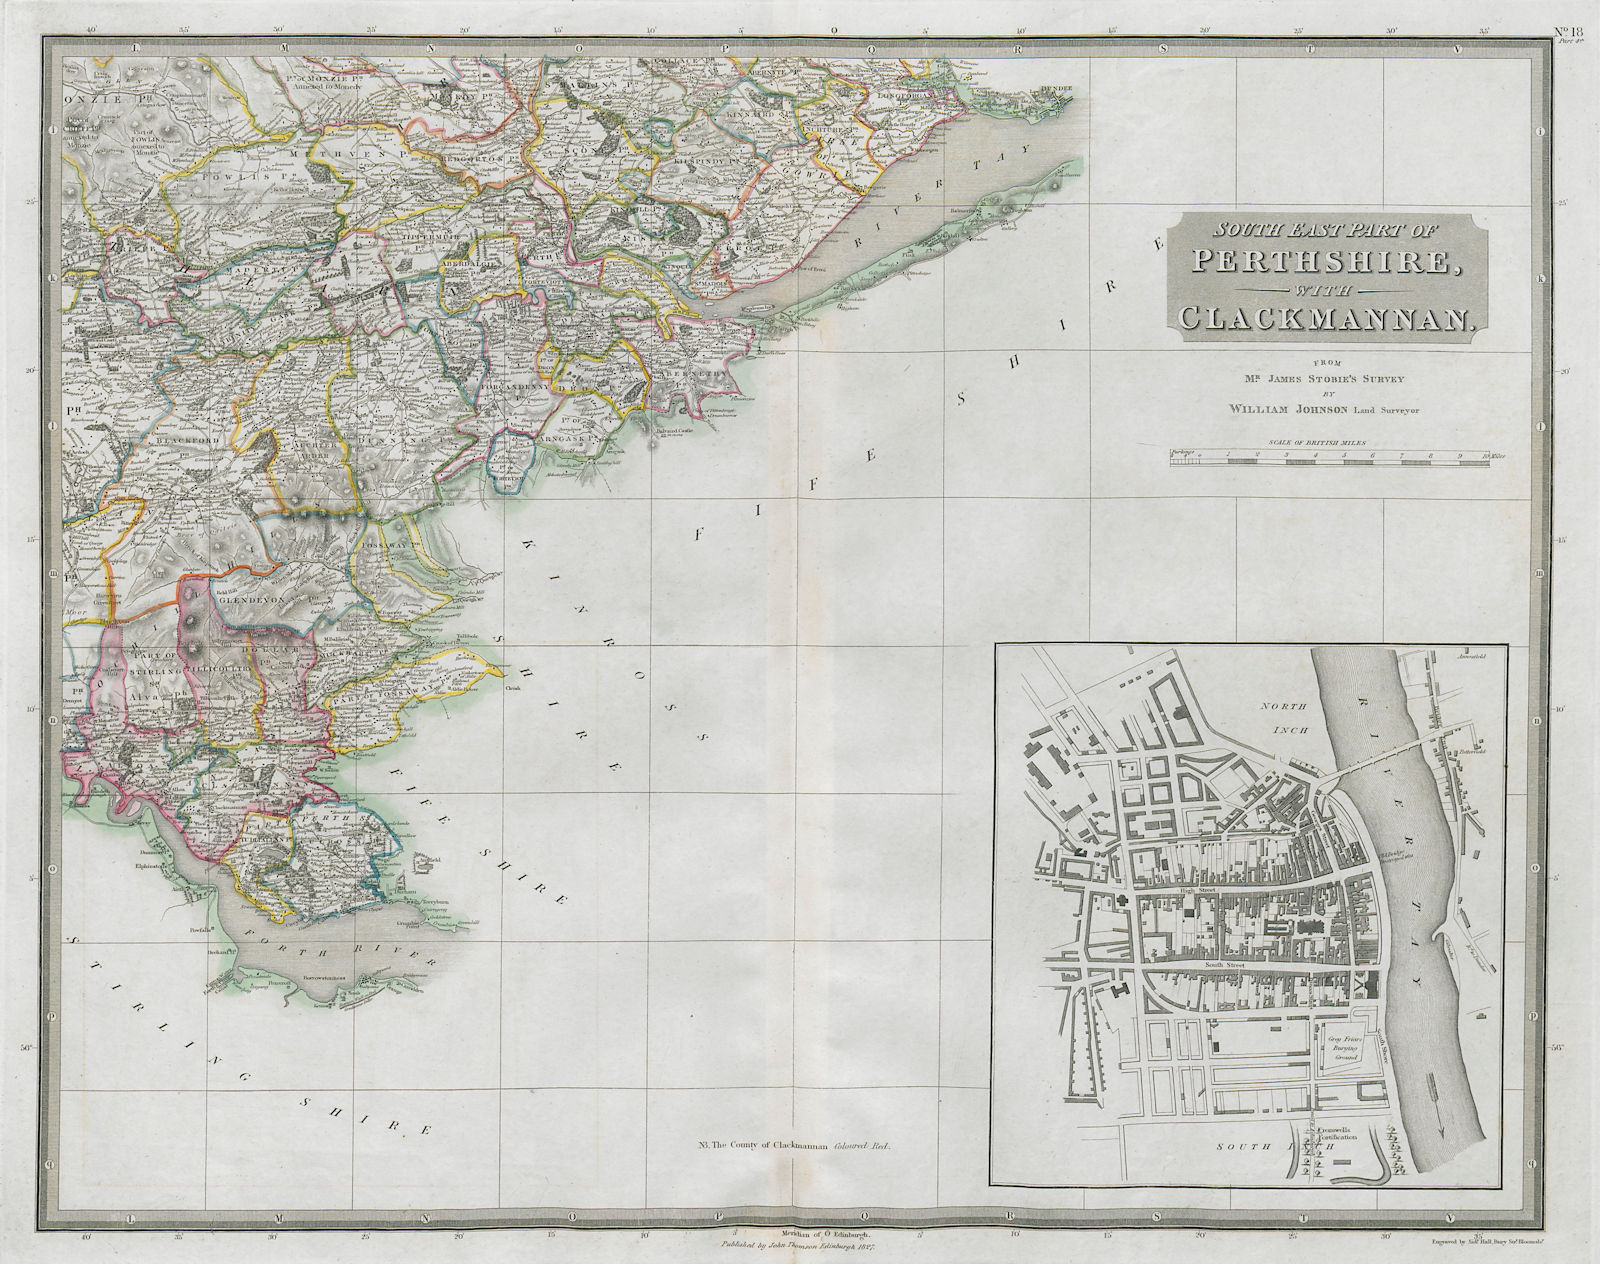 Associate Product South east Perthshire & Clackmannanshire. Dundee Gleneagles. THOMSON 1832 map